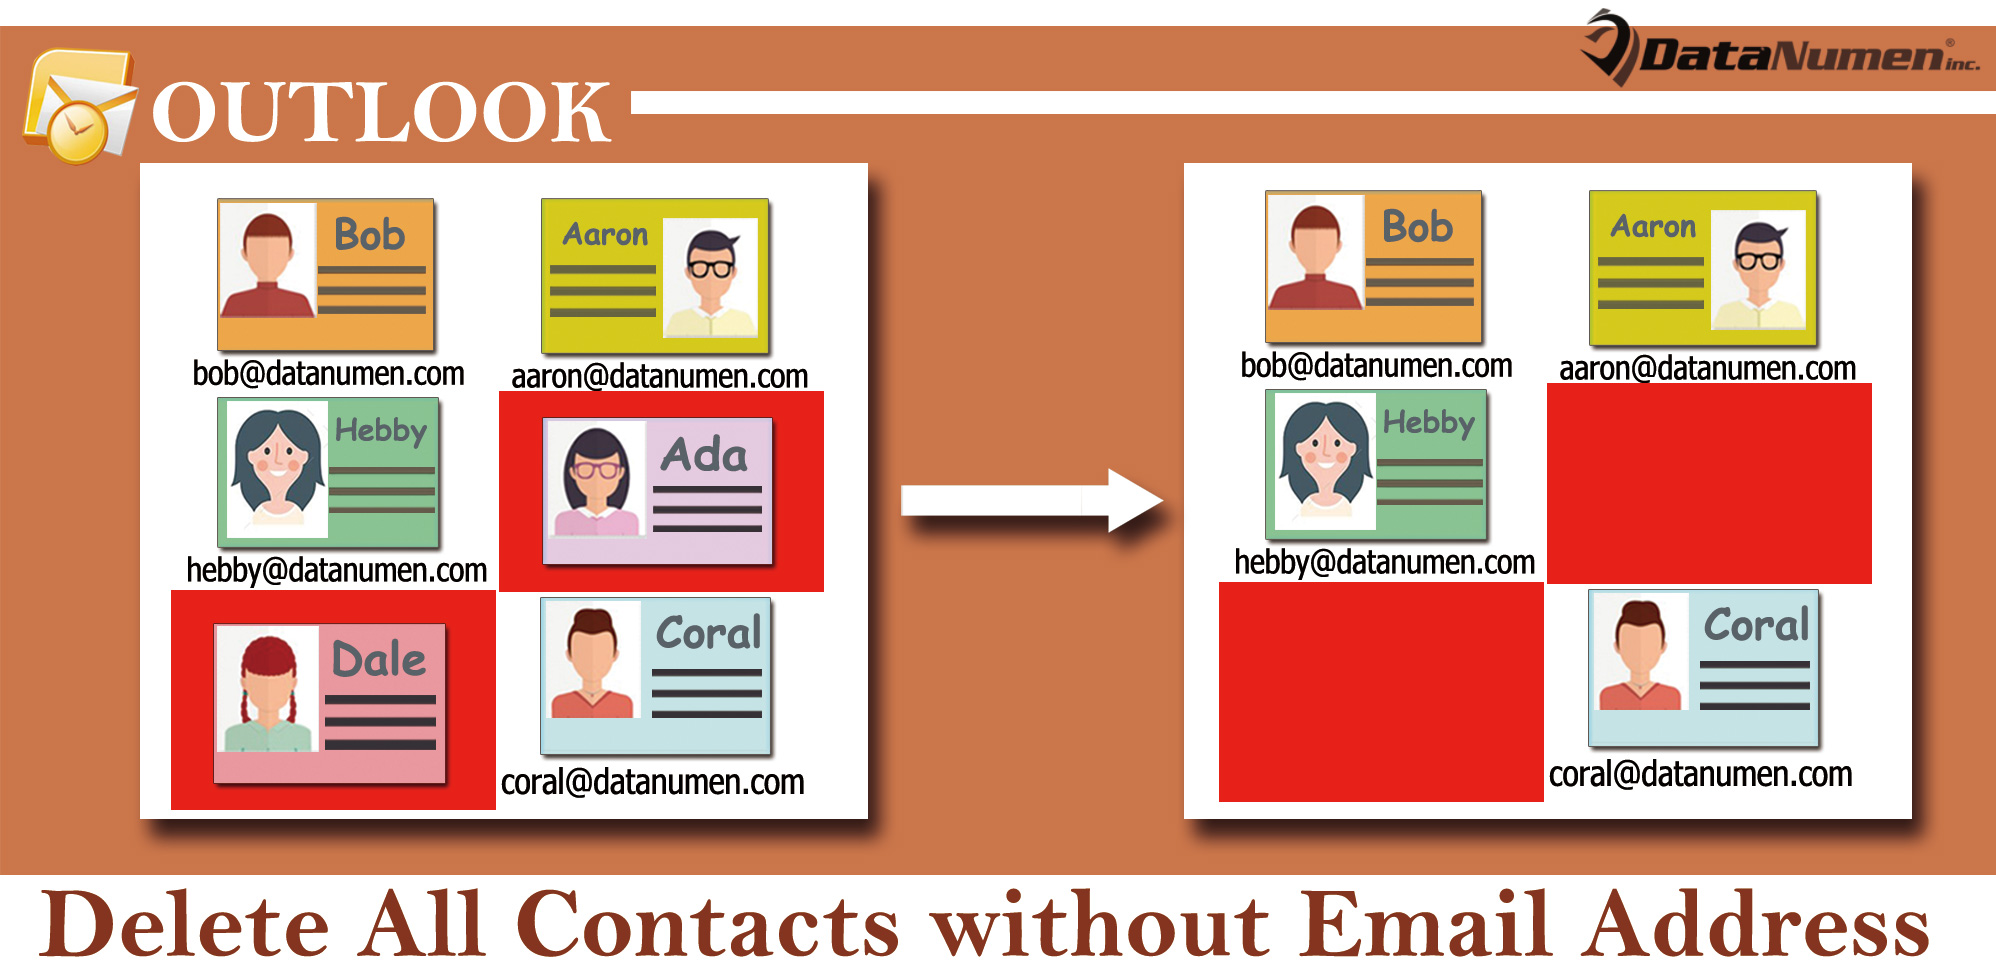 Batch Delete All Contacts without Email Address in Your Outlook